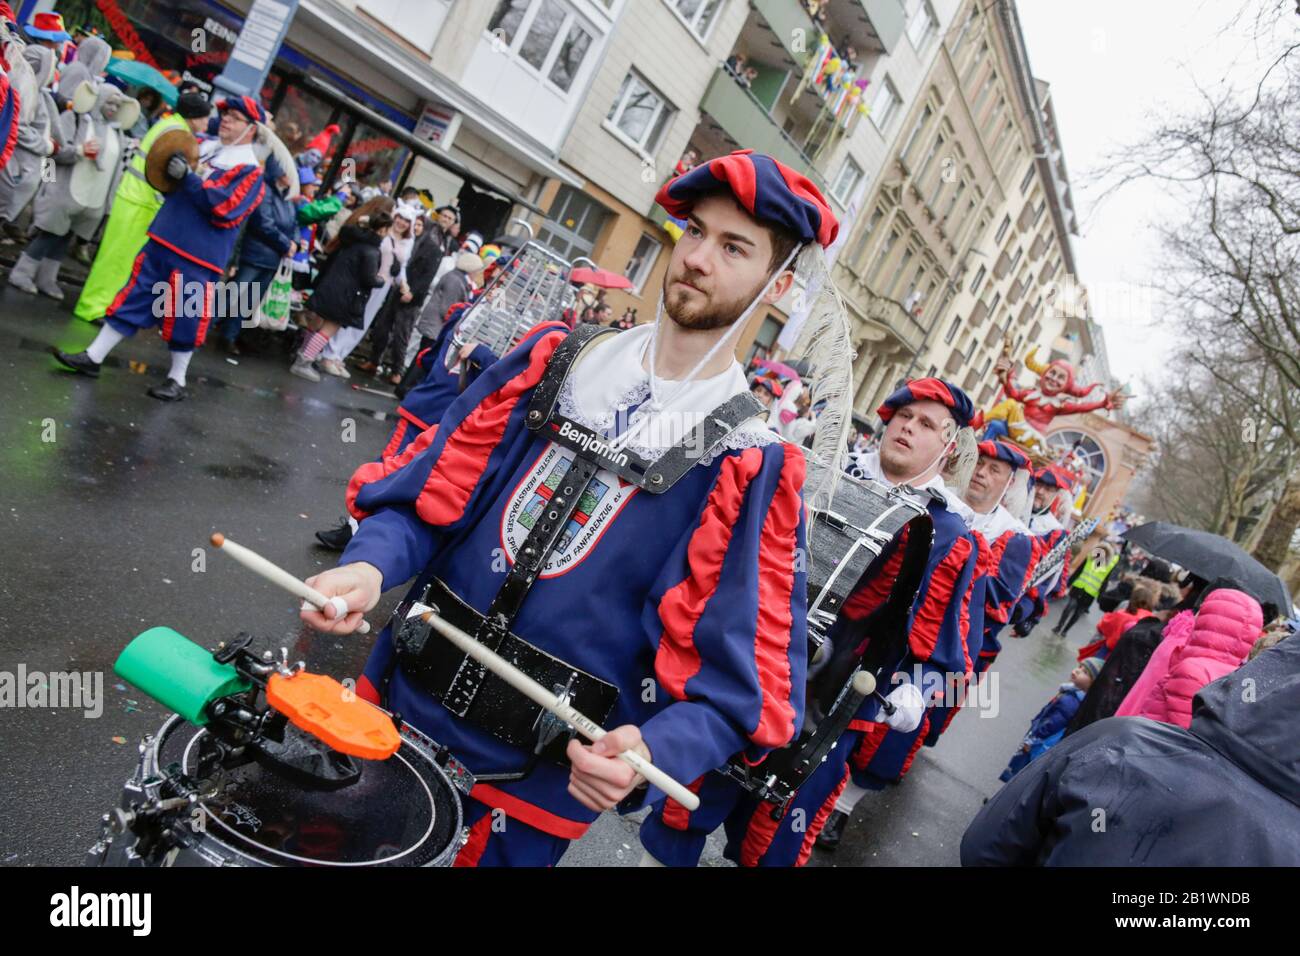 Mainz, Germany. 24th February 2020. Members of the fanfare band 1. Bergstraesser Spielmanns und Fanfarenzug march in the the Mainz Rose Monday parade. Around half a million people lined the streets of Mainz for the traditional Rose Monday Carnival Parade. The 9 km long parade with over 9,000 participants is one of the three large Rose Monday Parades in Germany. Stock Photo